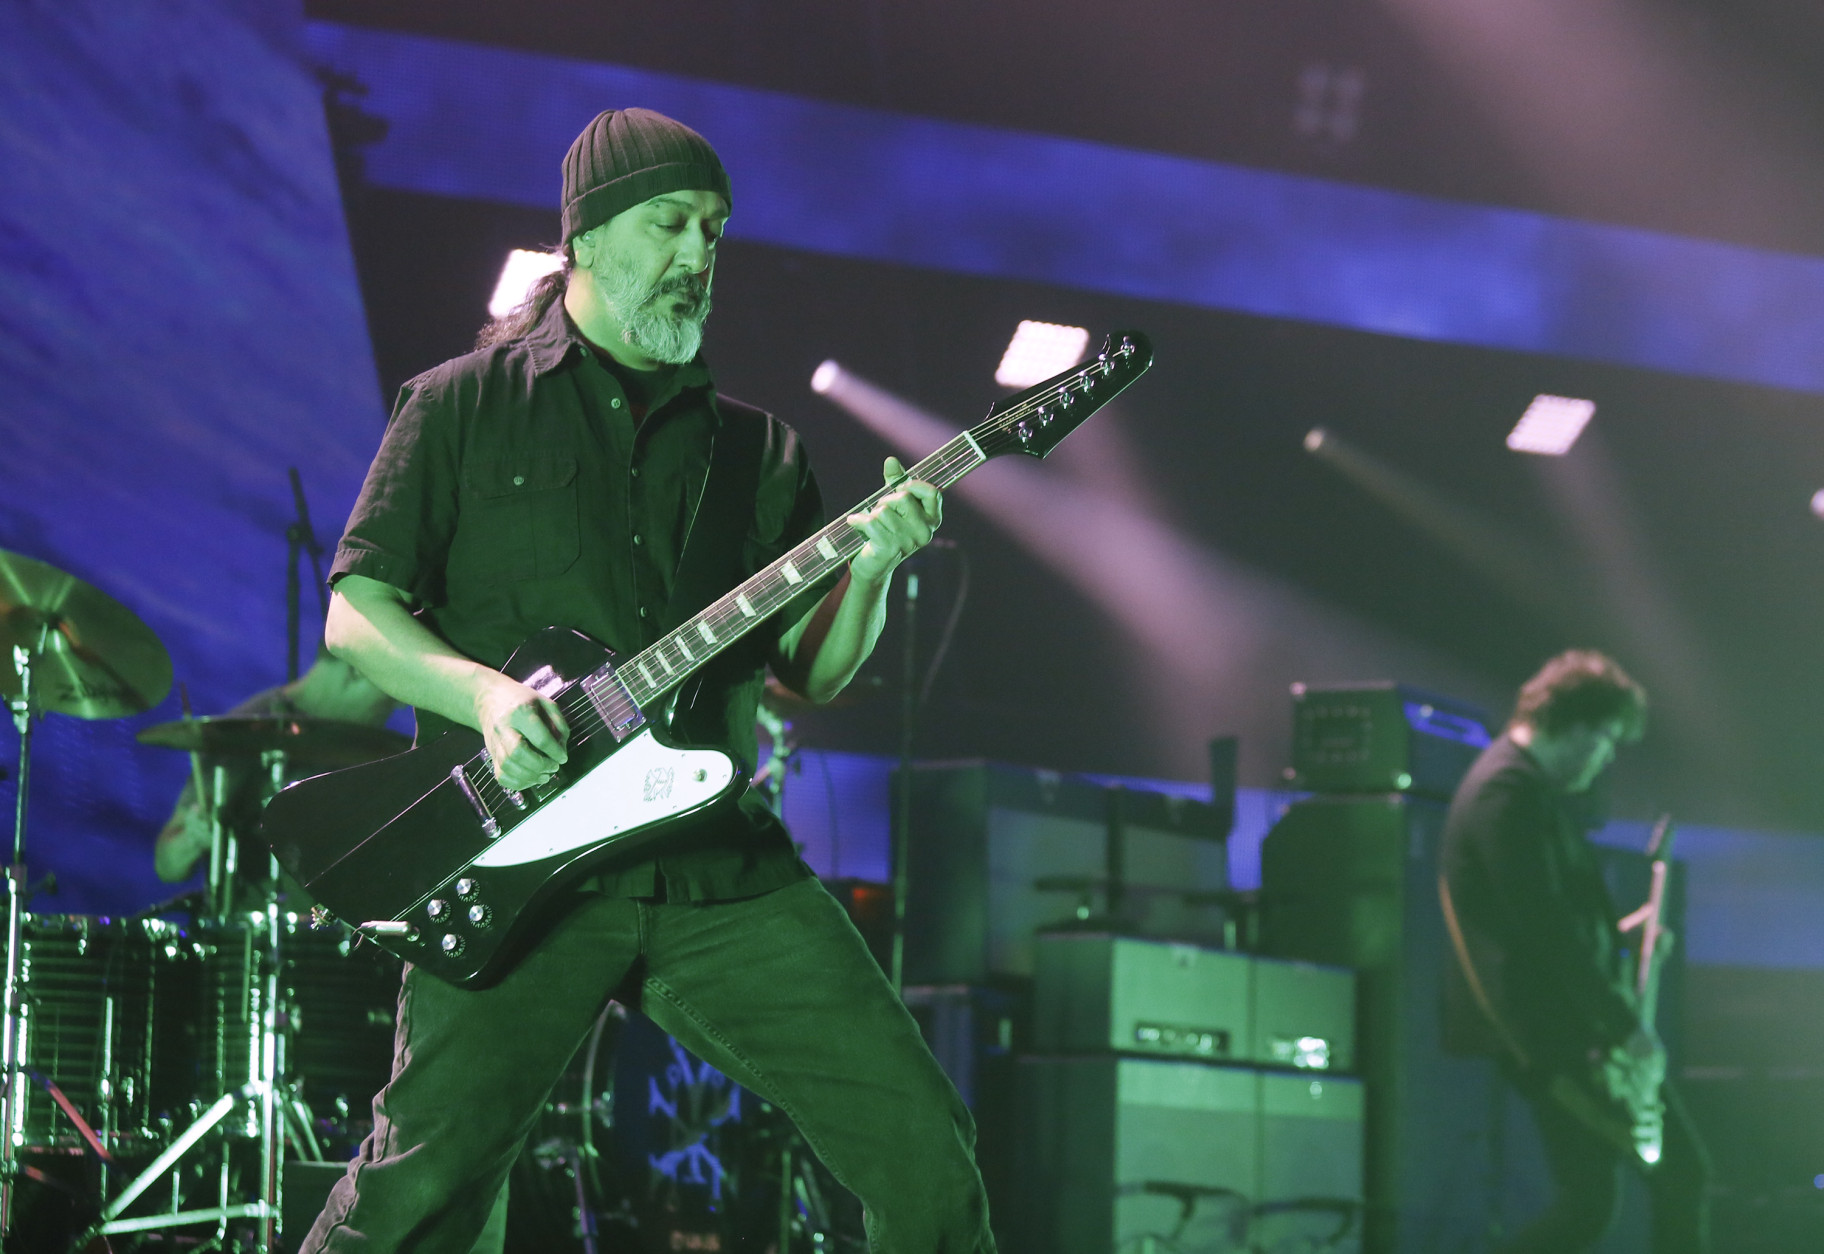 Guitarist Kim Thayil of Soundgarden is 55 on Sept. 4. Here, Thayil performs at the iTunes Festival showcase during the SXSW Music Festival on Thursday, March 13, 2014, in Austin, Texas. (Photo by Jack Plunkett/Invision/AP)